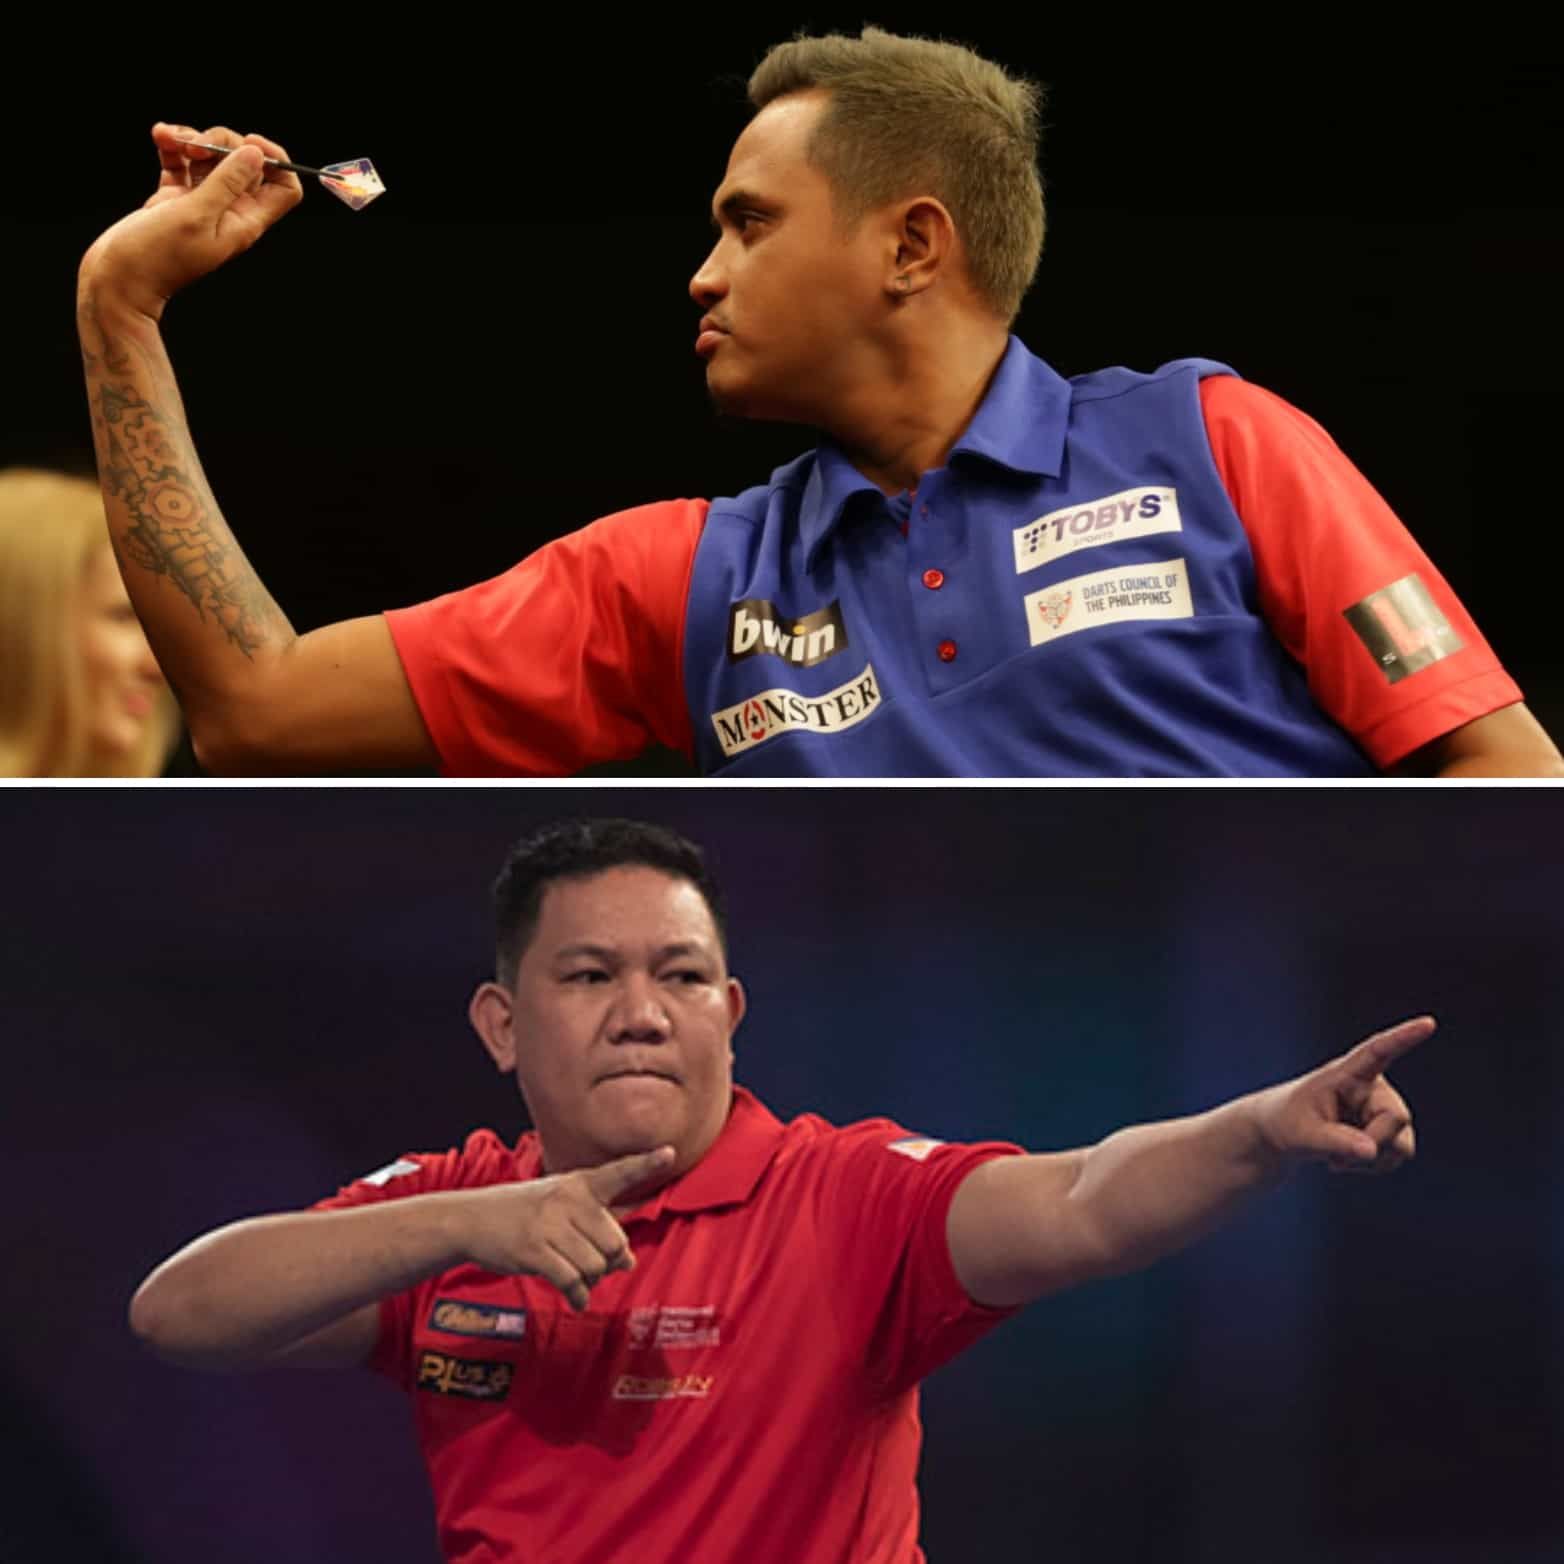 Meet the World Cup of Darts 2019 teams: Philippines and Poland